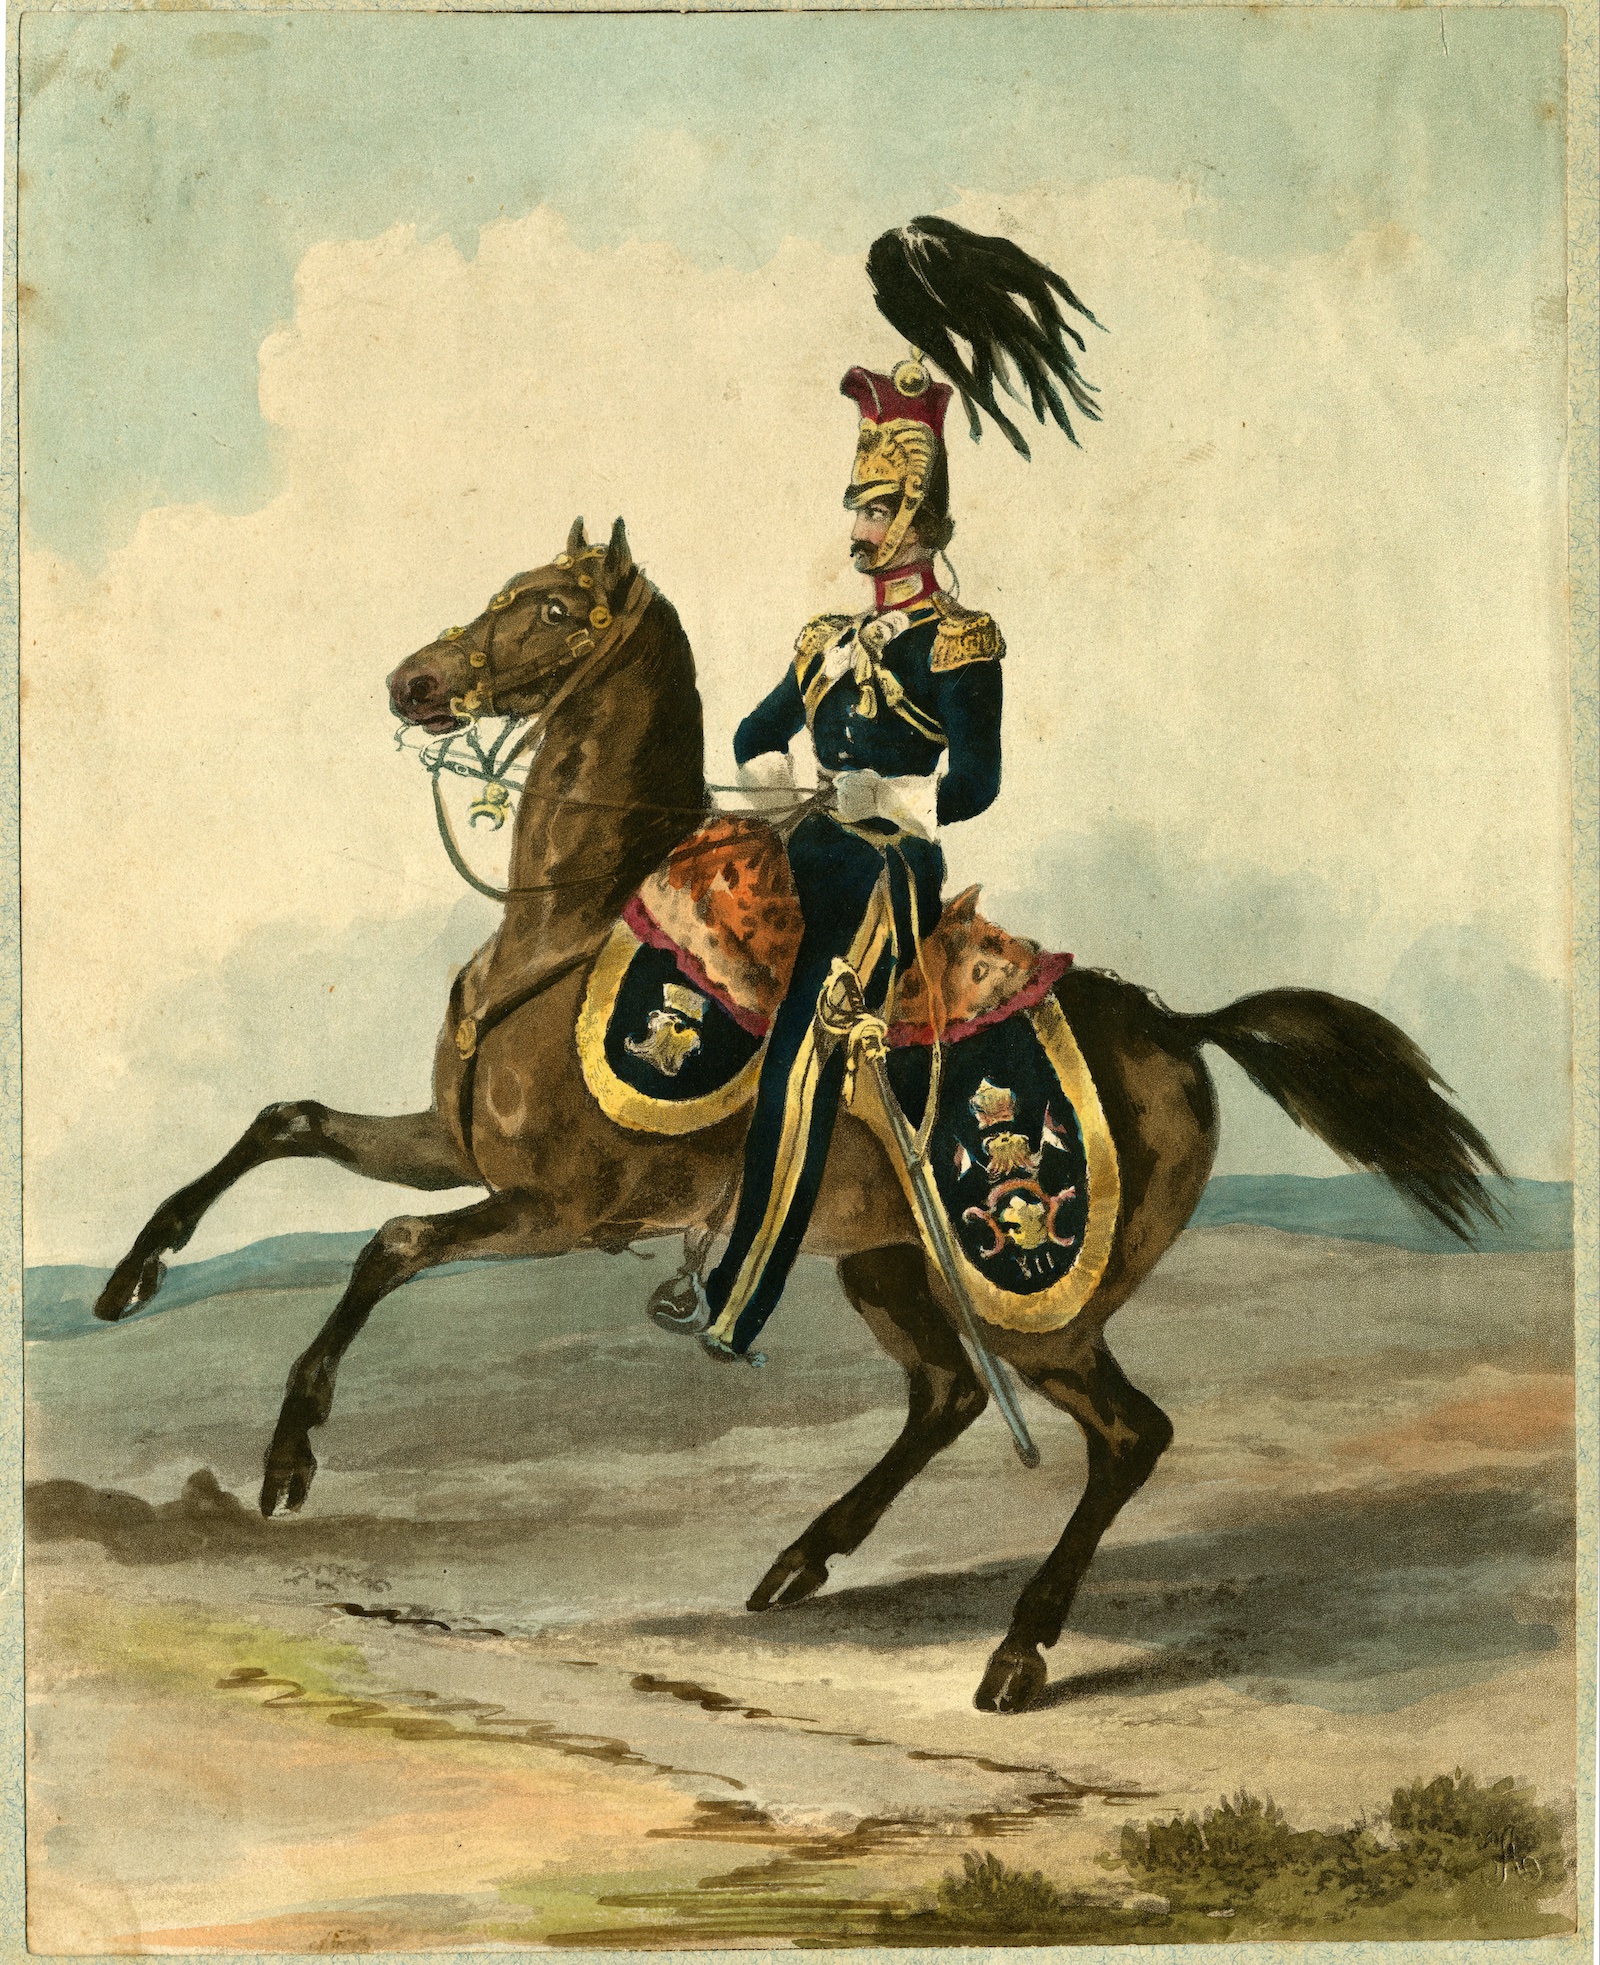 An officer of the 12th Lancers, c. 1835. Prints, Drawings and Watercolors from the Anne S.K. Brown Military Collection. Brown Digital Repository. Brown University Library. Public Domain.